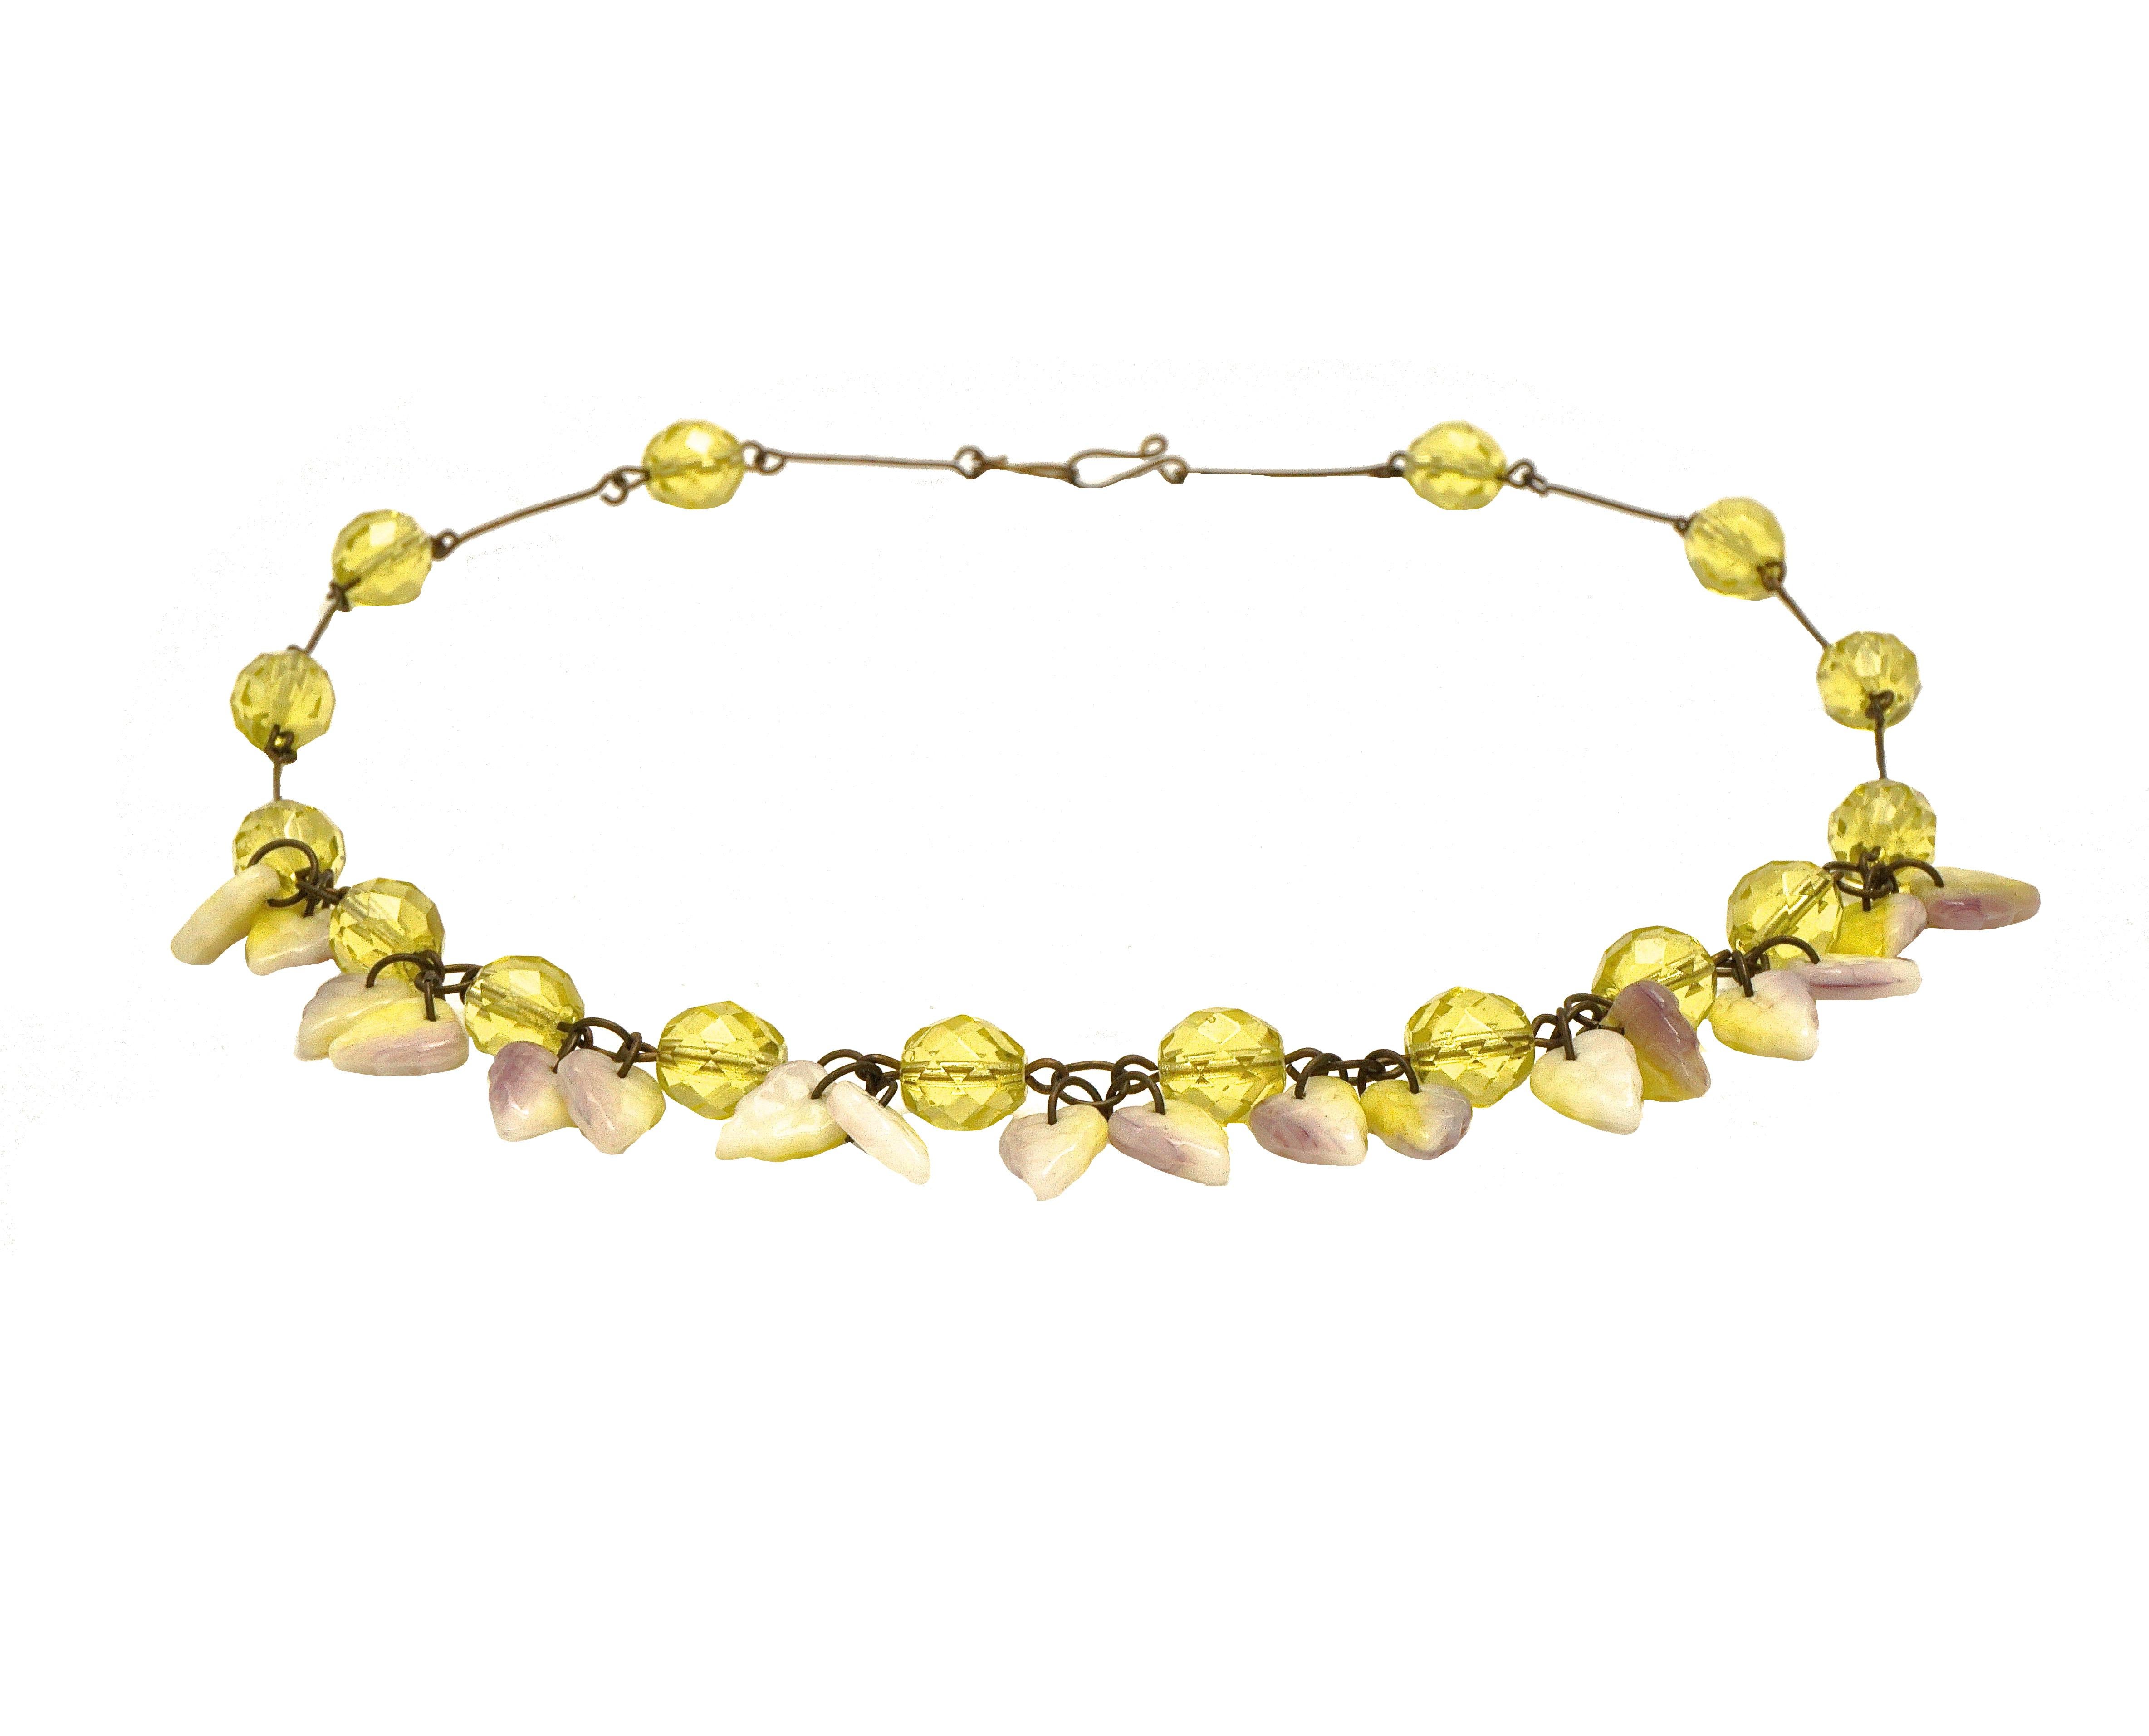 Art Deco Czech Citrine Glass Necklace with White, Citrine and Lilac Glass Leaves For Sale 4